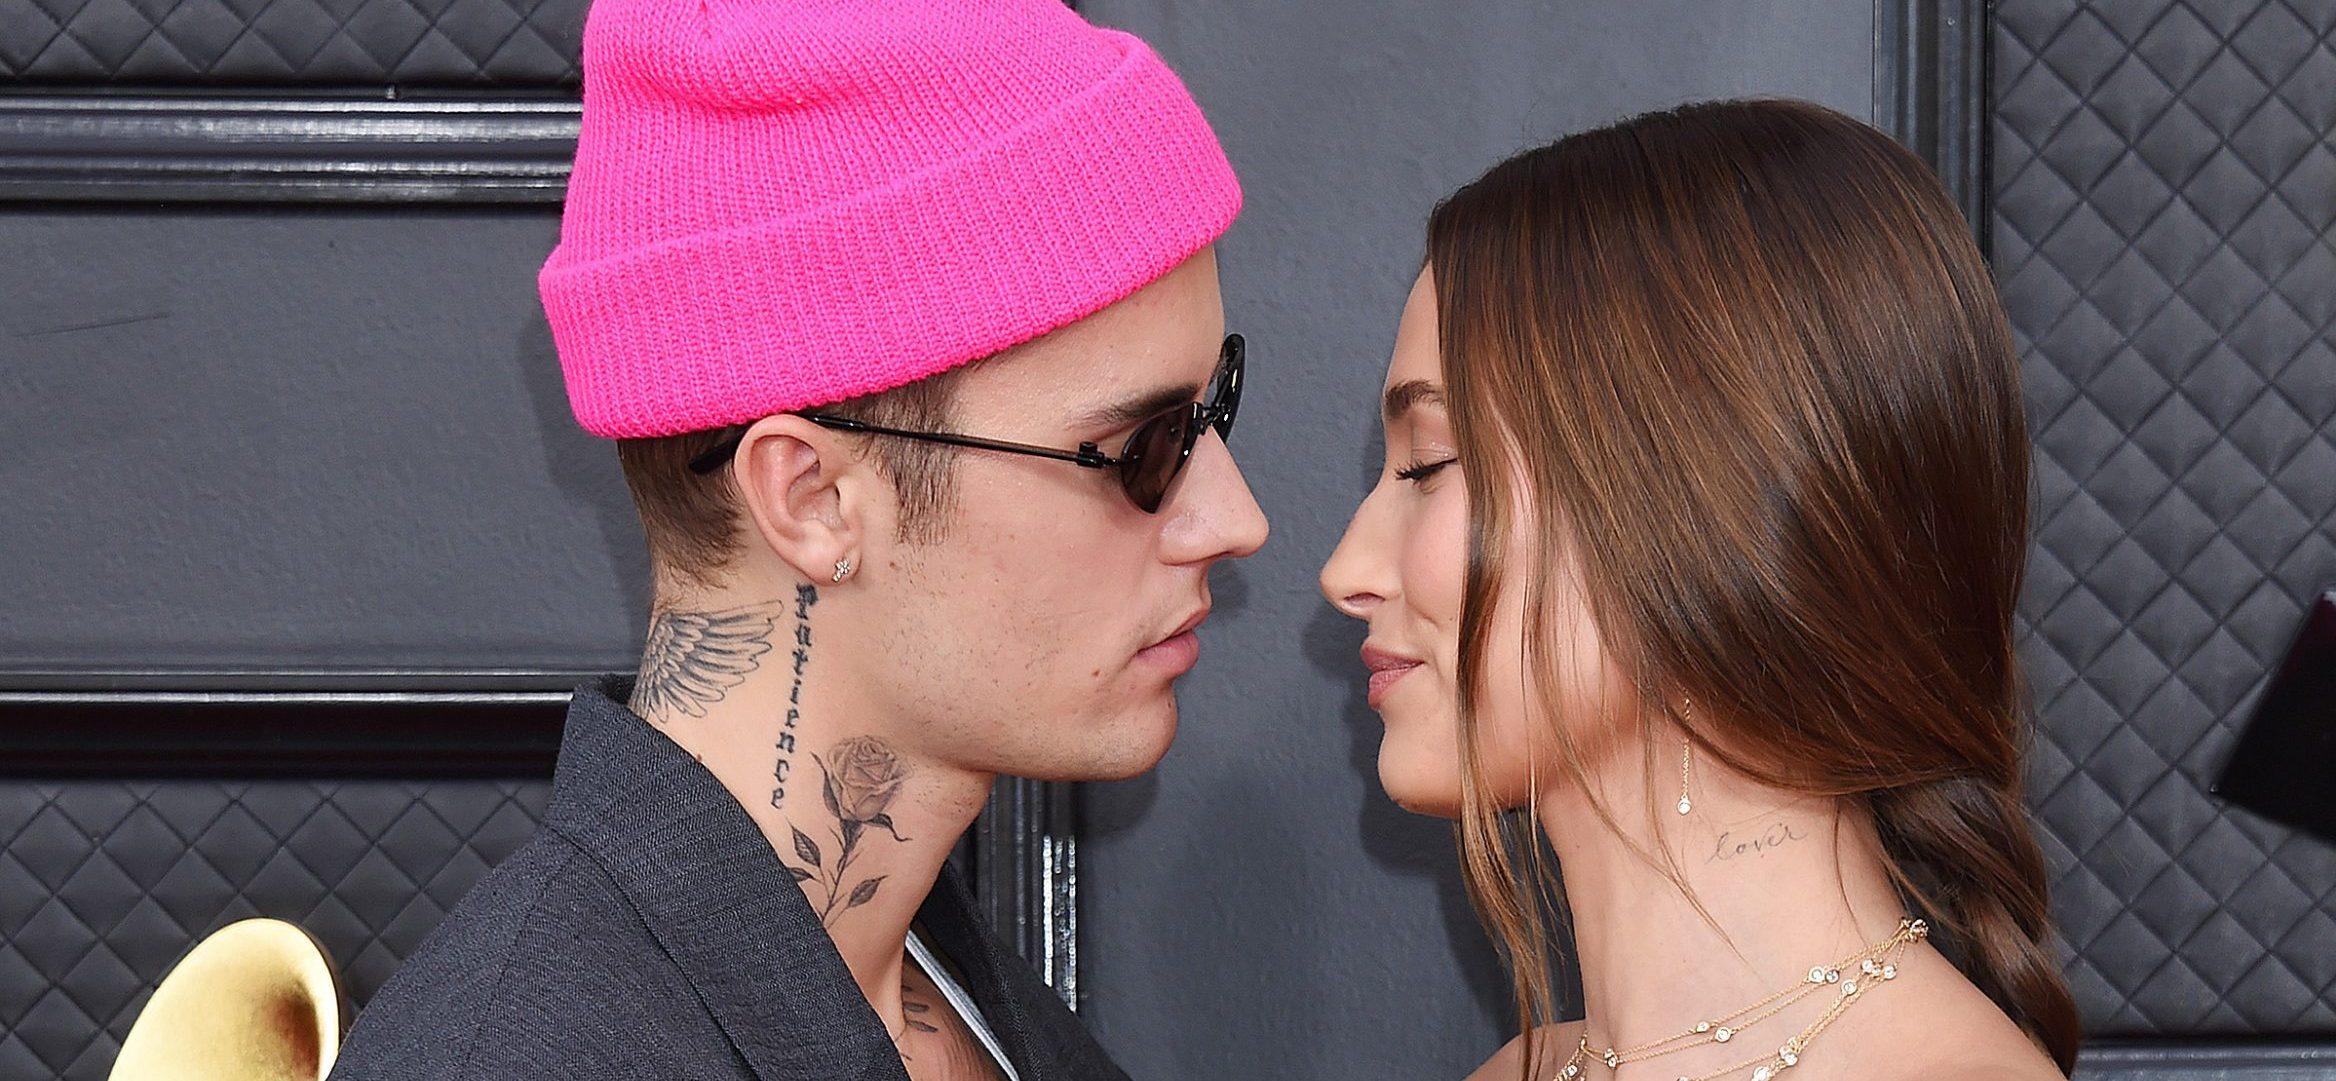 Justin Bieber Hailed As Ultimate ‘Supportive Husband’ While Promoting Hailey’s Skincare Product